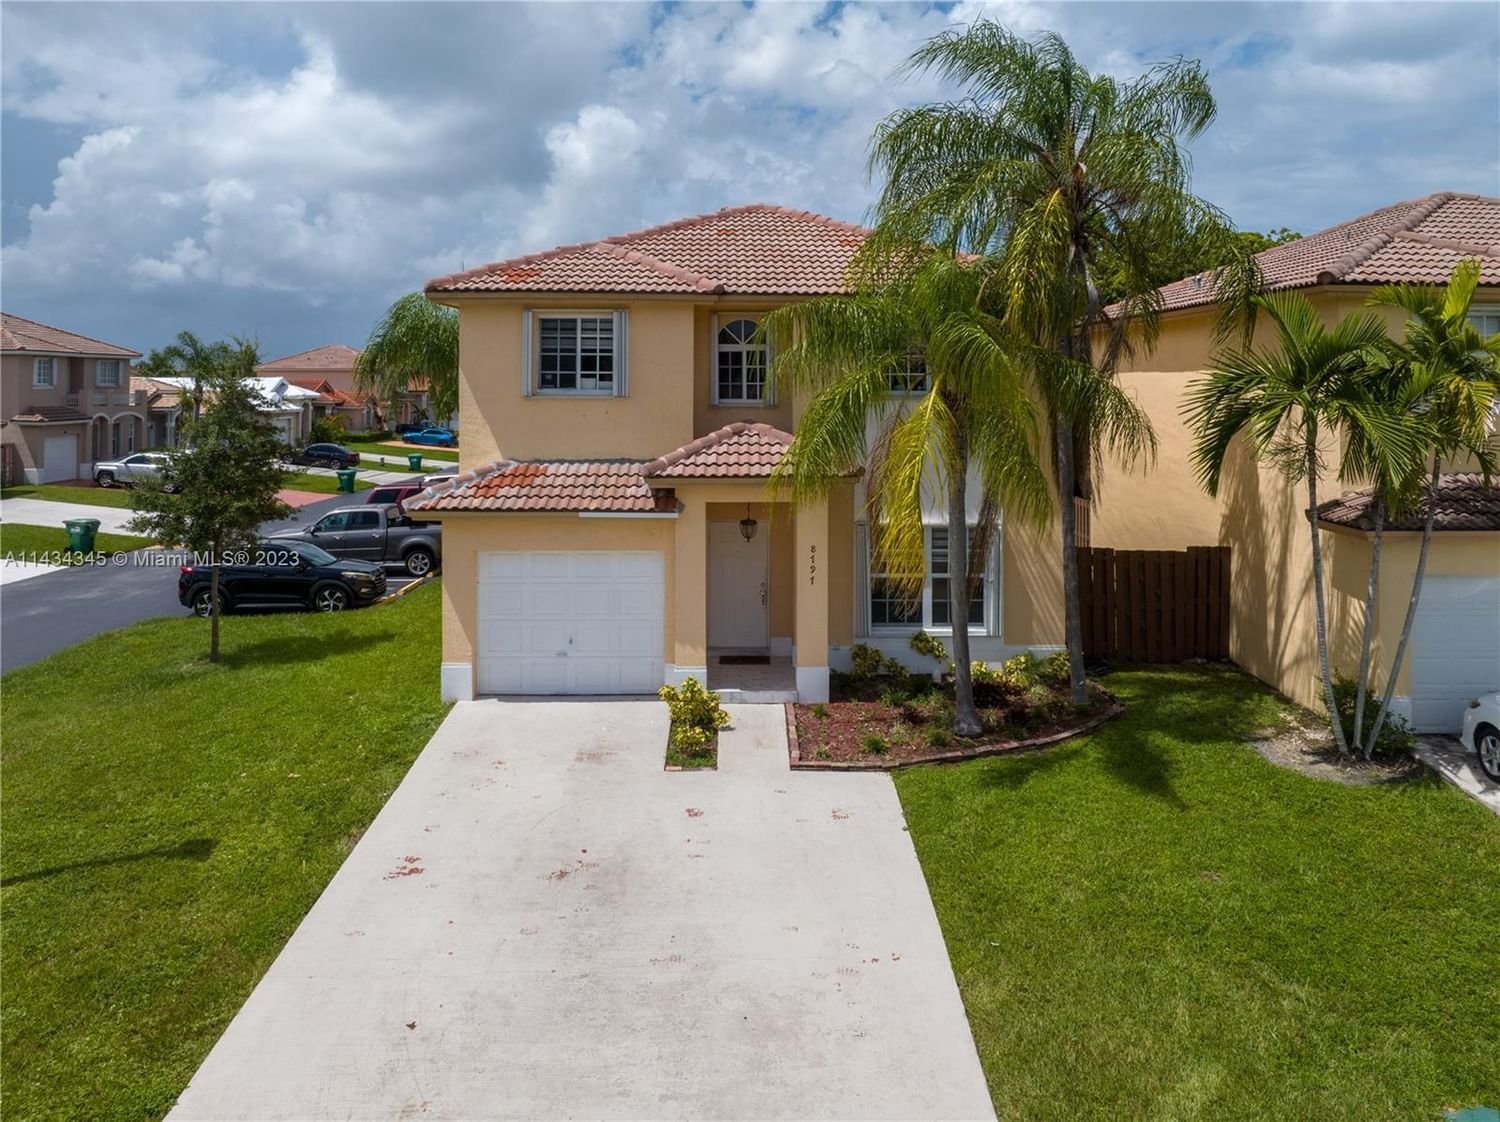 Real estate property located at 8797 214th Ln, Miami-Dade County, Cutler Bay, FL